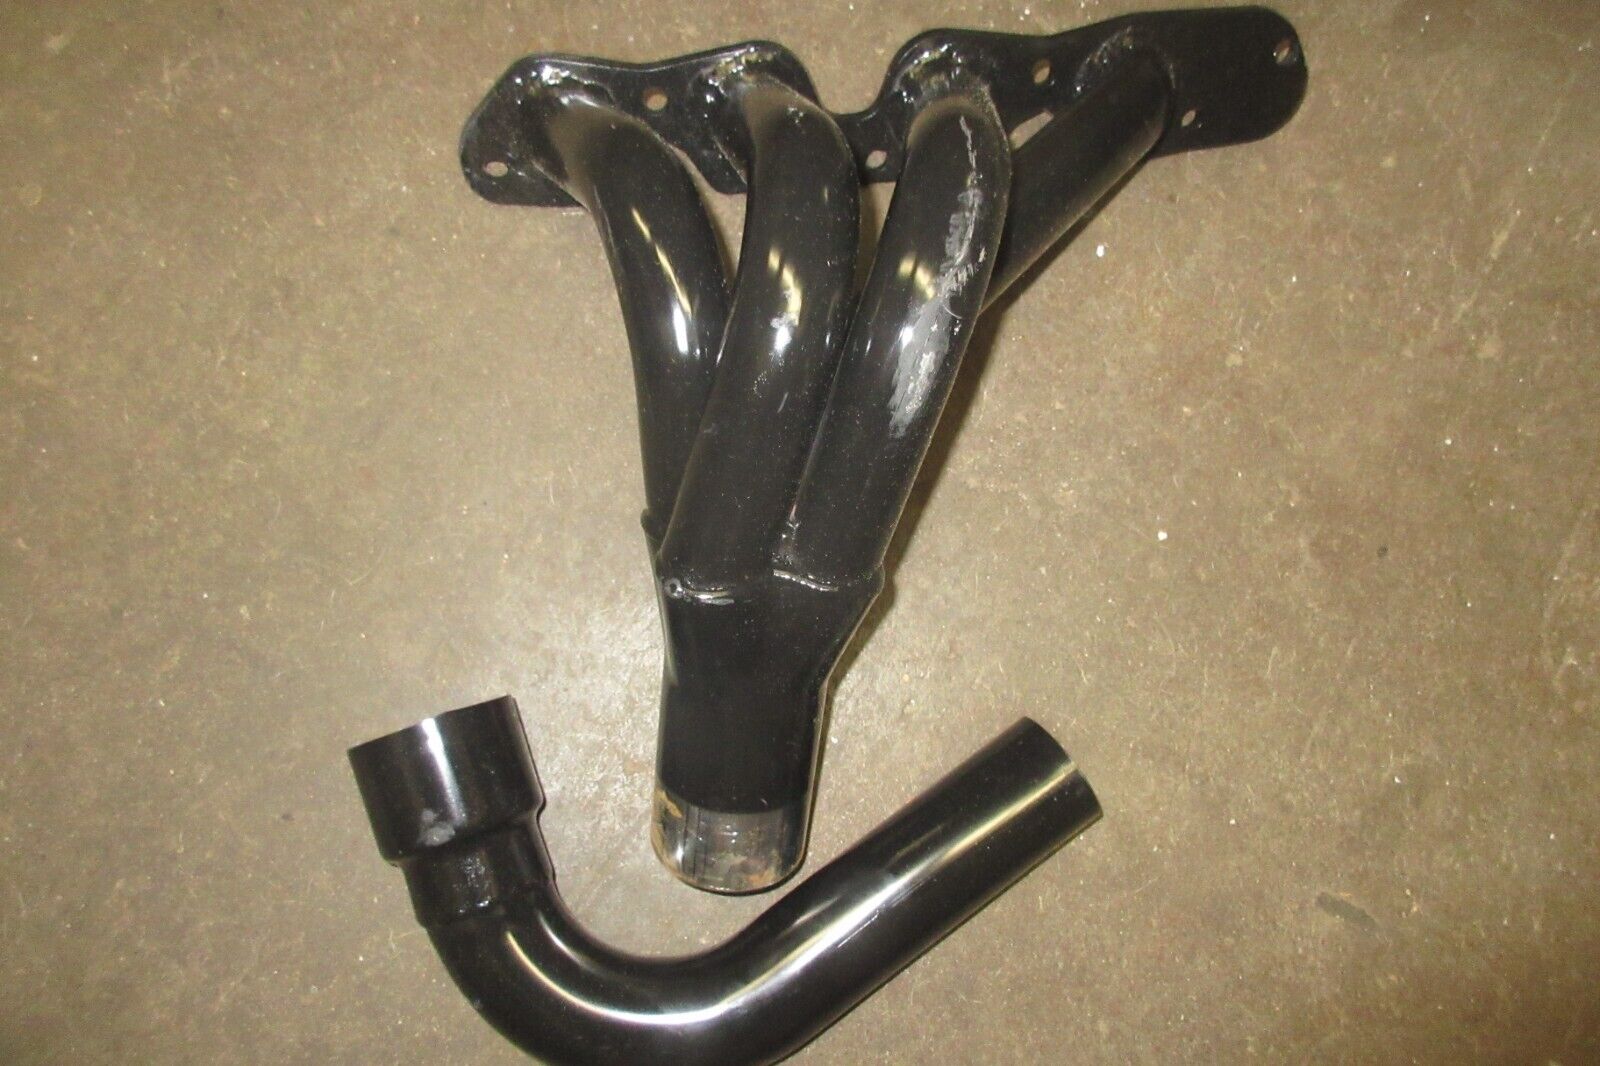 Fiat 124 2000 Spider Coupe High Performance Tubular Exhaust Headers 1972-1985